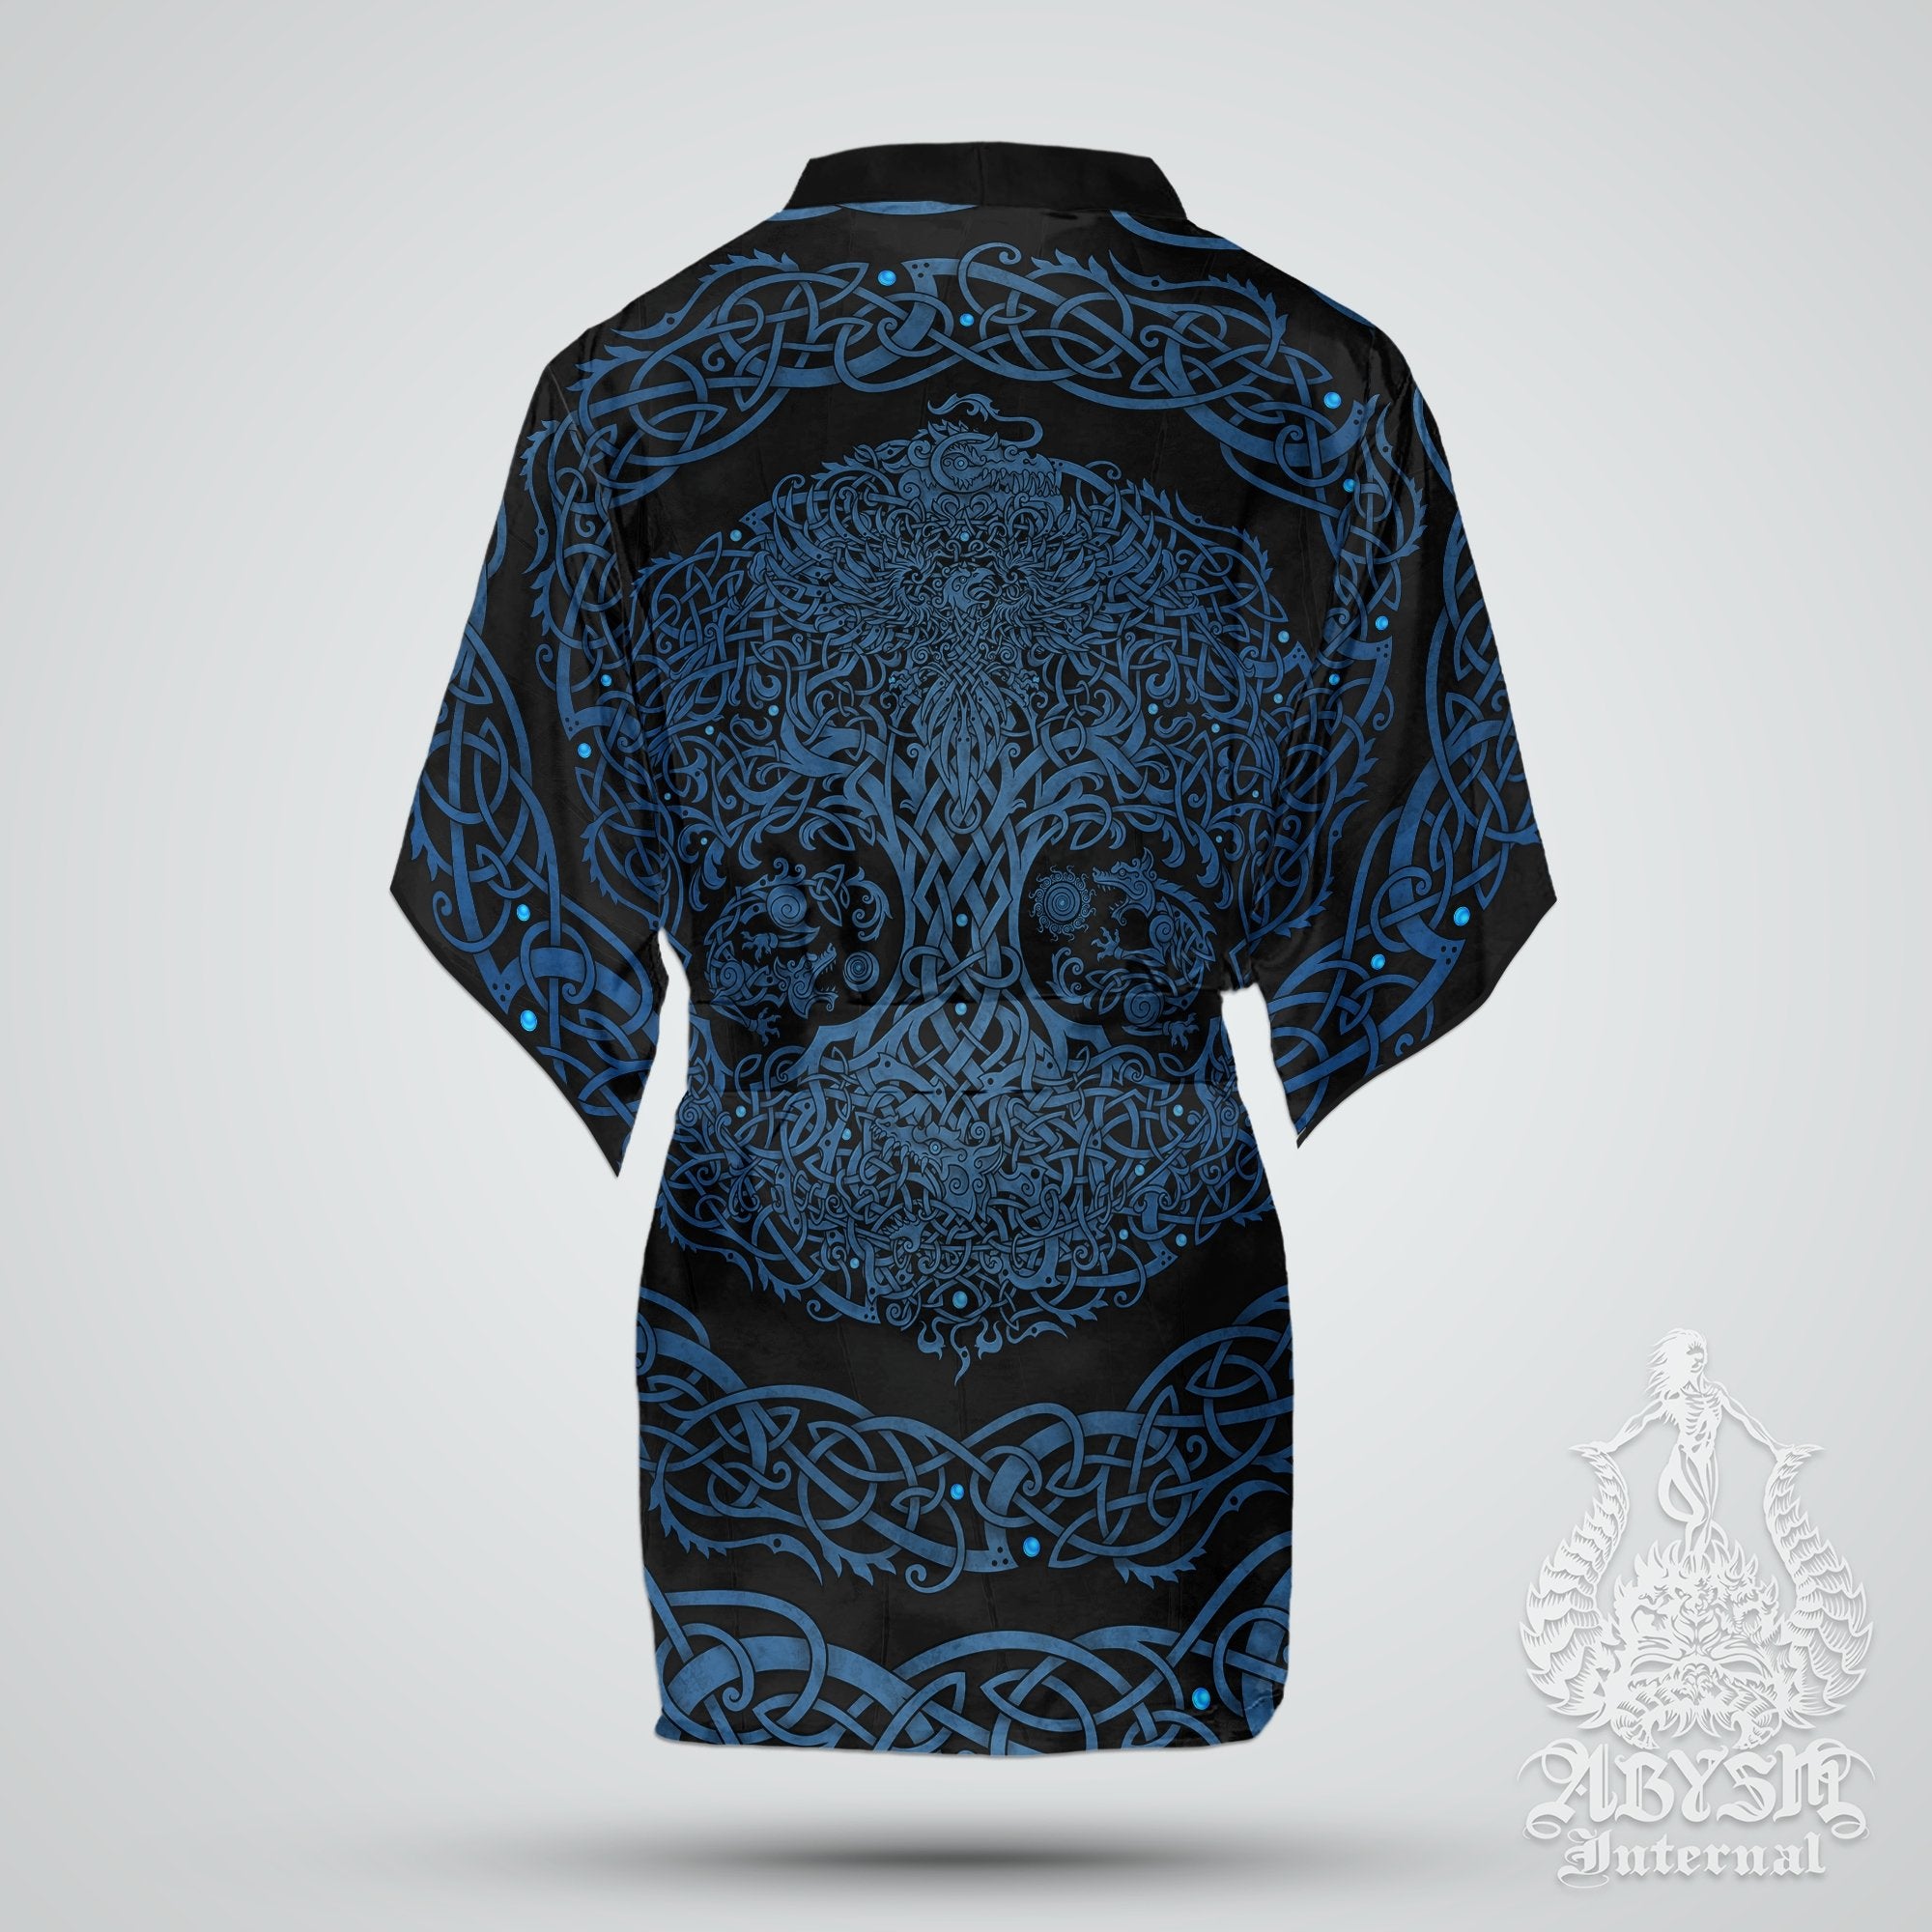 Viking Cover Up, Beach Outfit, Yggdrasil Party Kimono, Summer Festival Robe, Norse Indie and Alternative Clothing, Unisex - Tree of Life, Blue Black - Abysm Internal